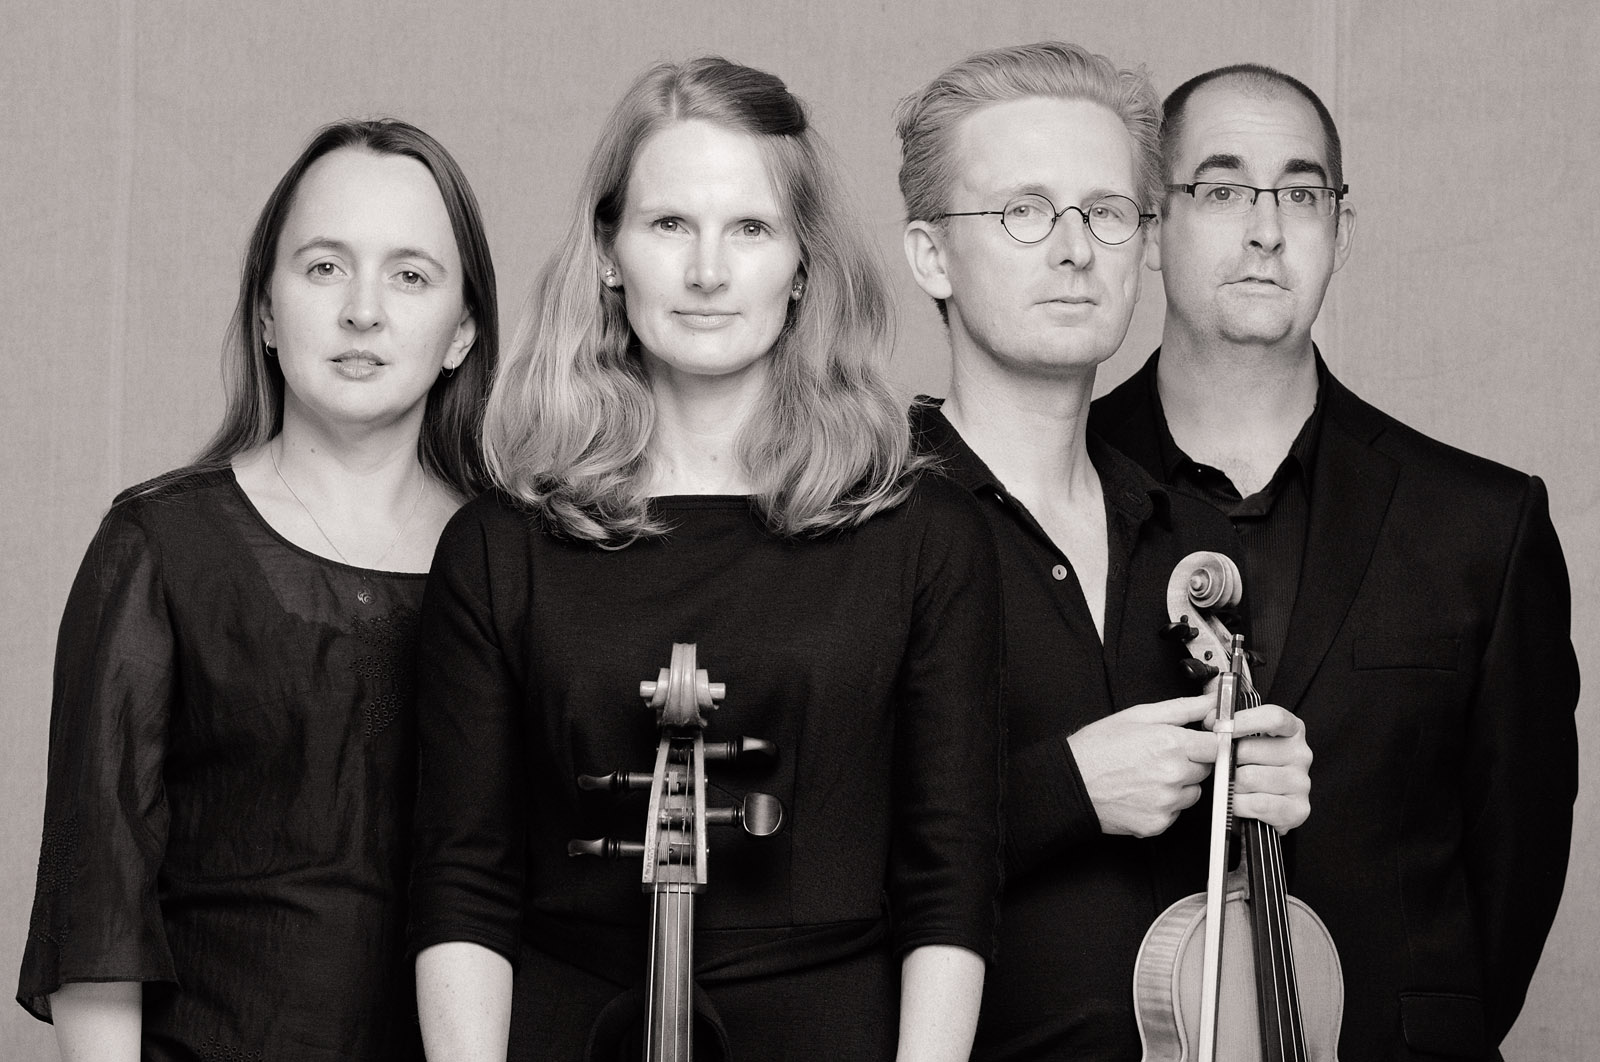 Marketing and promotional portrait for a classical music string quartet. Studio Photography by Kent Johnson.